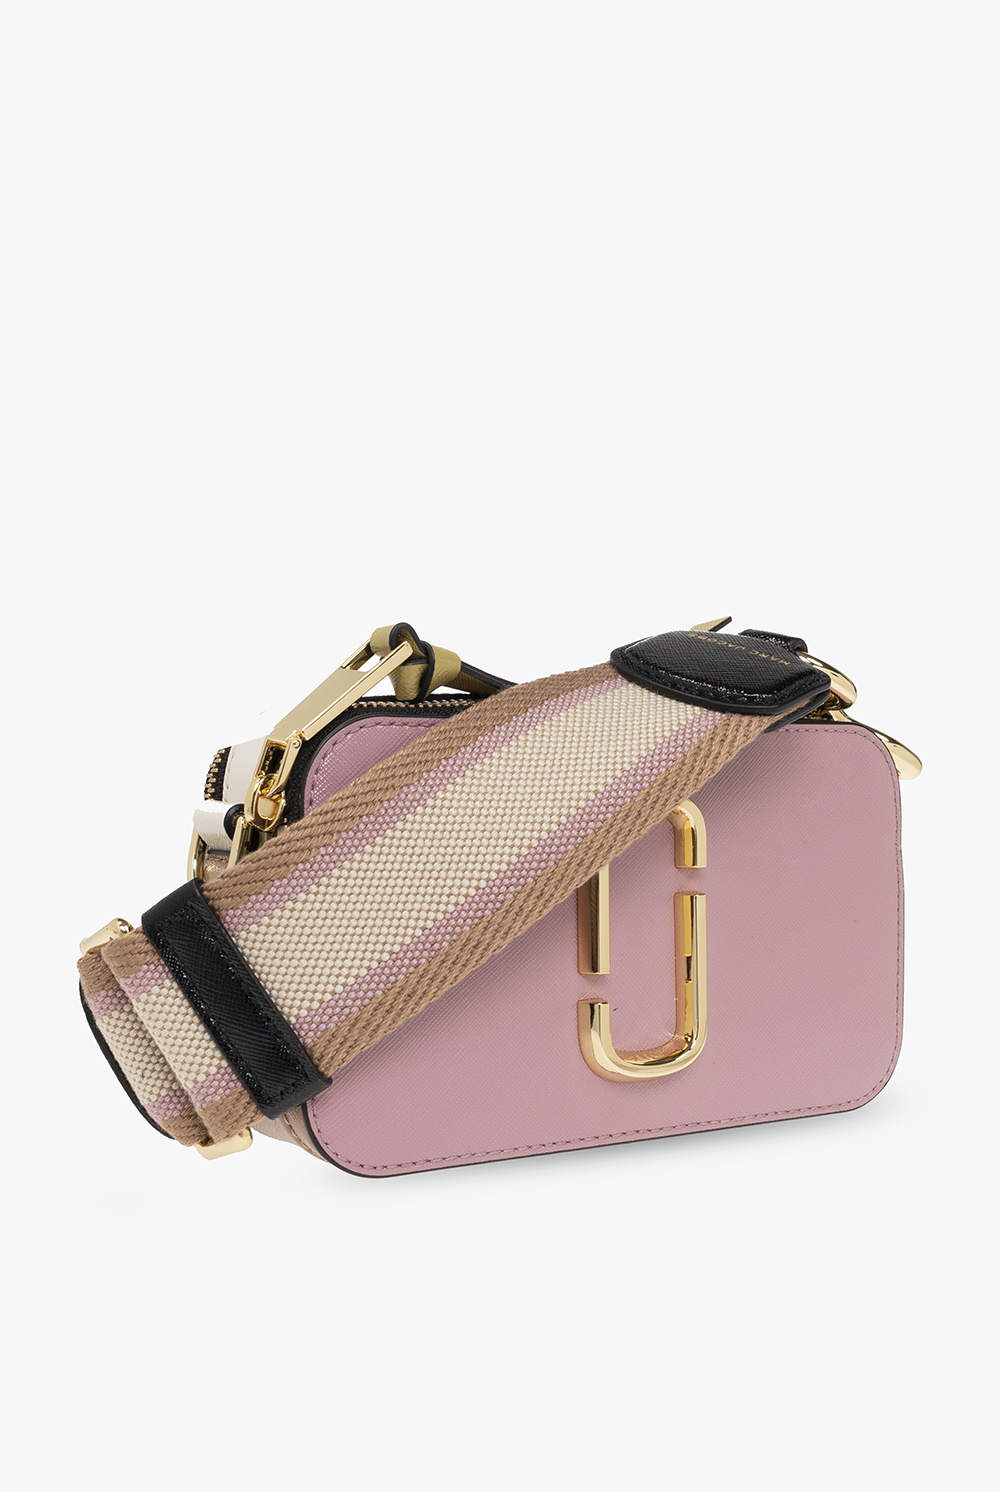 MARC JACOBS: The Snapshot Saffiano leather bag - Lilac  Marc Jacobs  crossbody bags H172L01SP22 online at